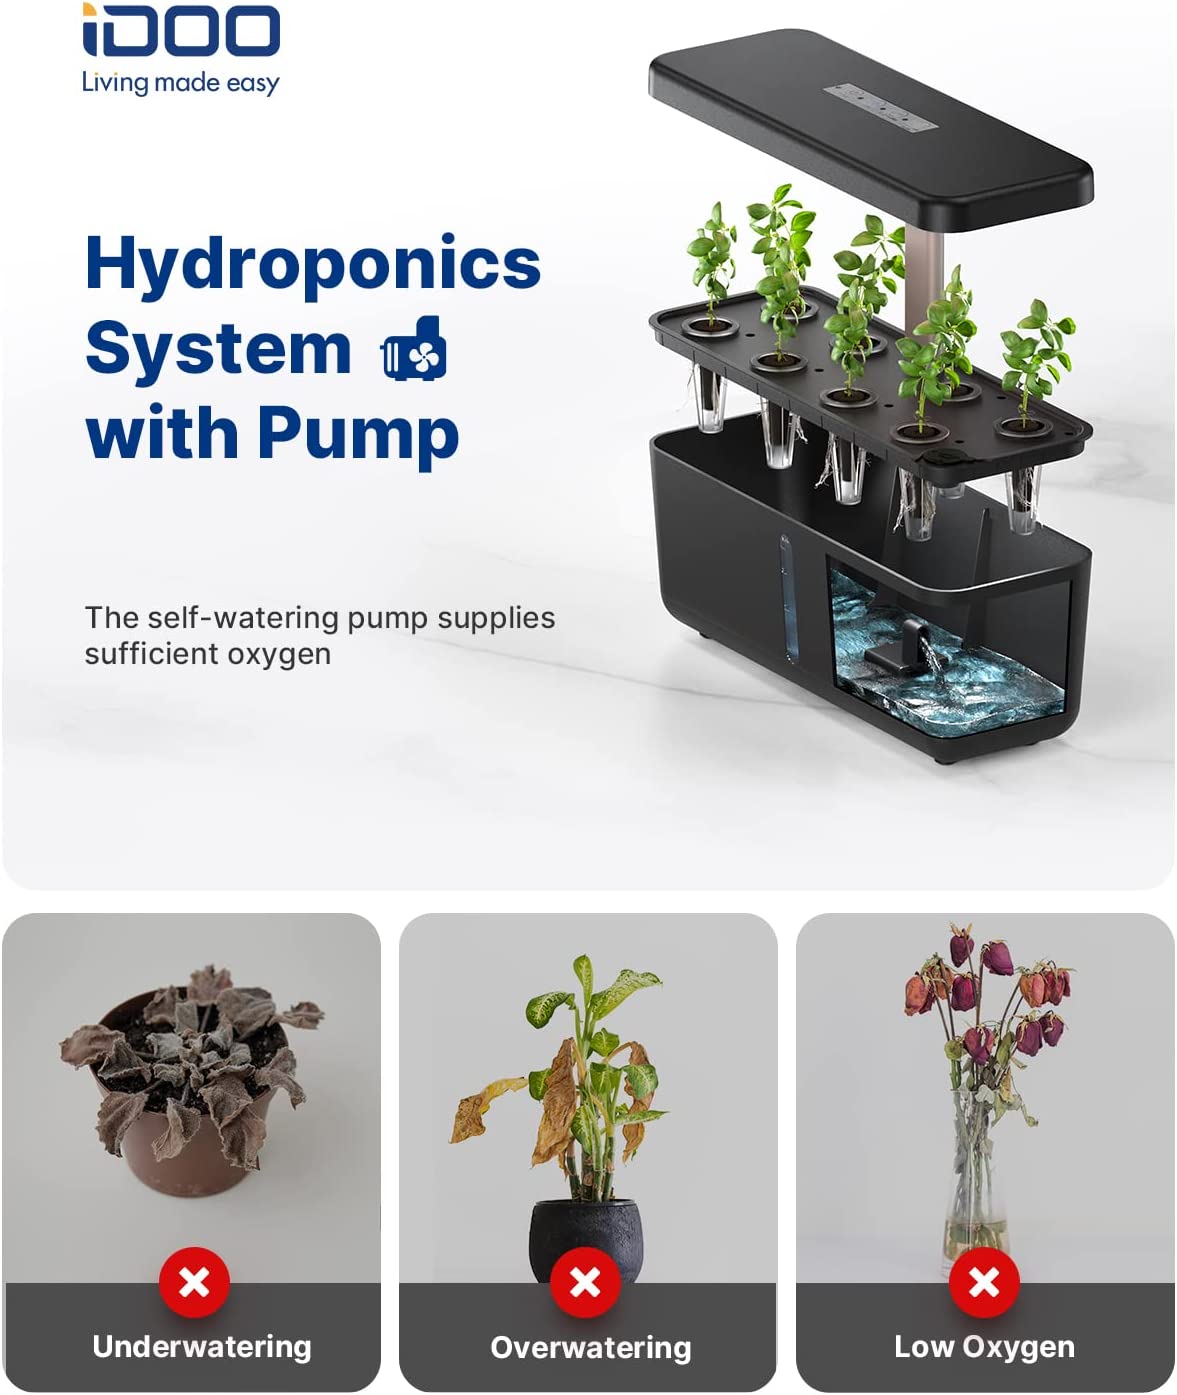 IDOO 8Pods WiFi Indoor Garden with APP Controlled - 8 Pods _wf_cus BFD CA Hydroponic Growing System Wifi by idoo